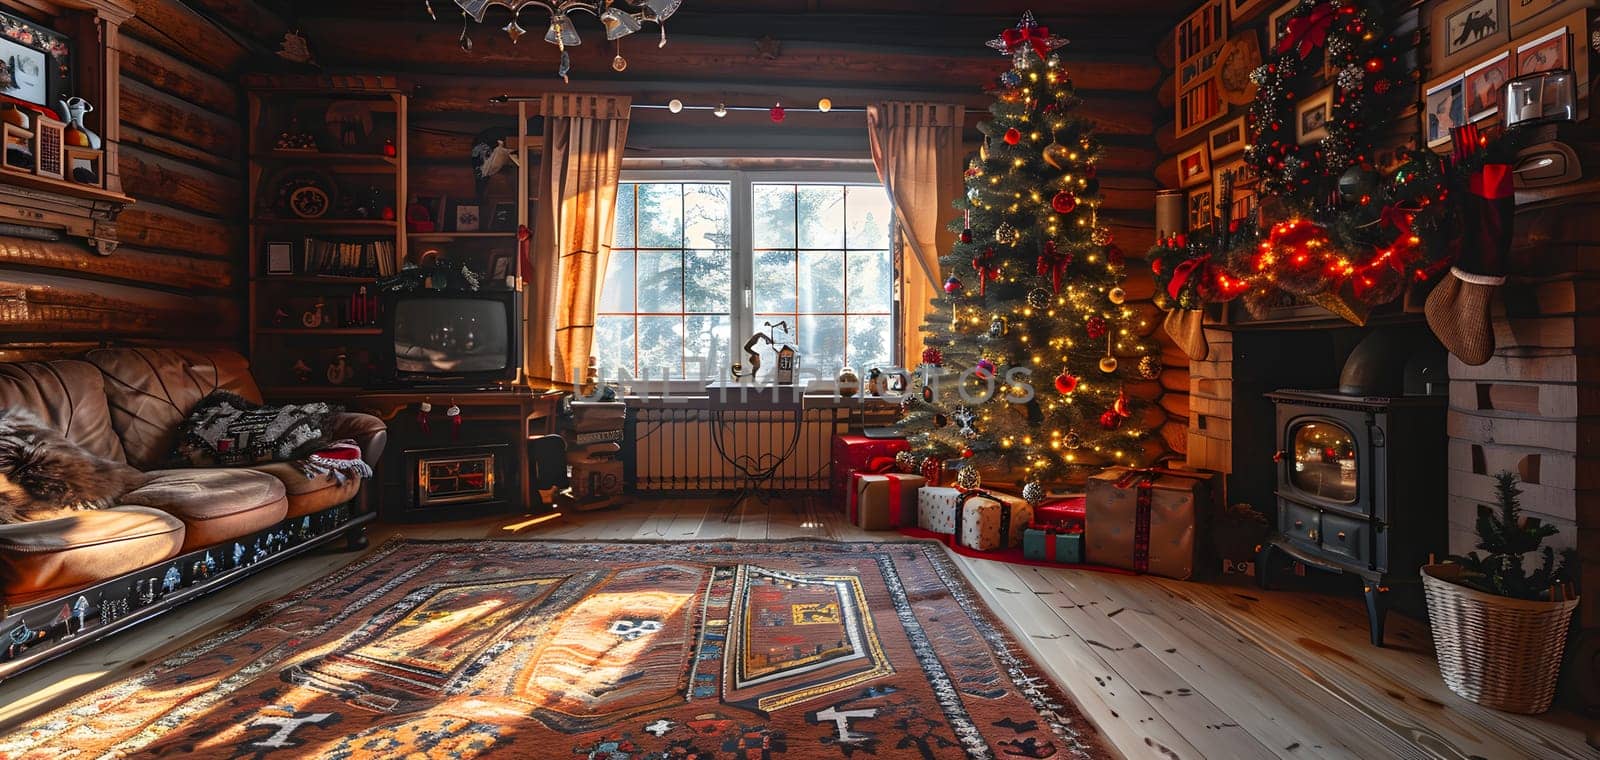 A Christmasthemed living room with a tree, presents, and cozy decor by Nadtochiy